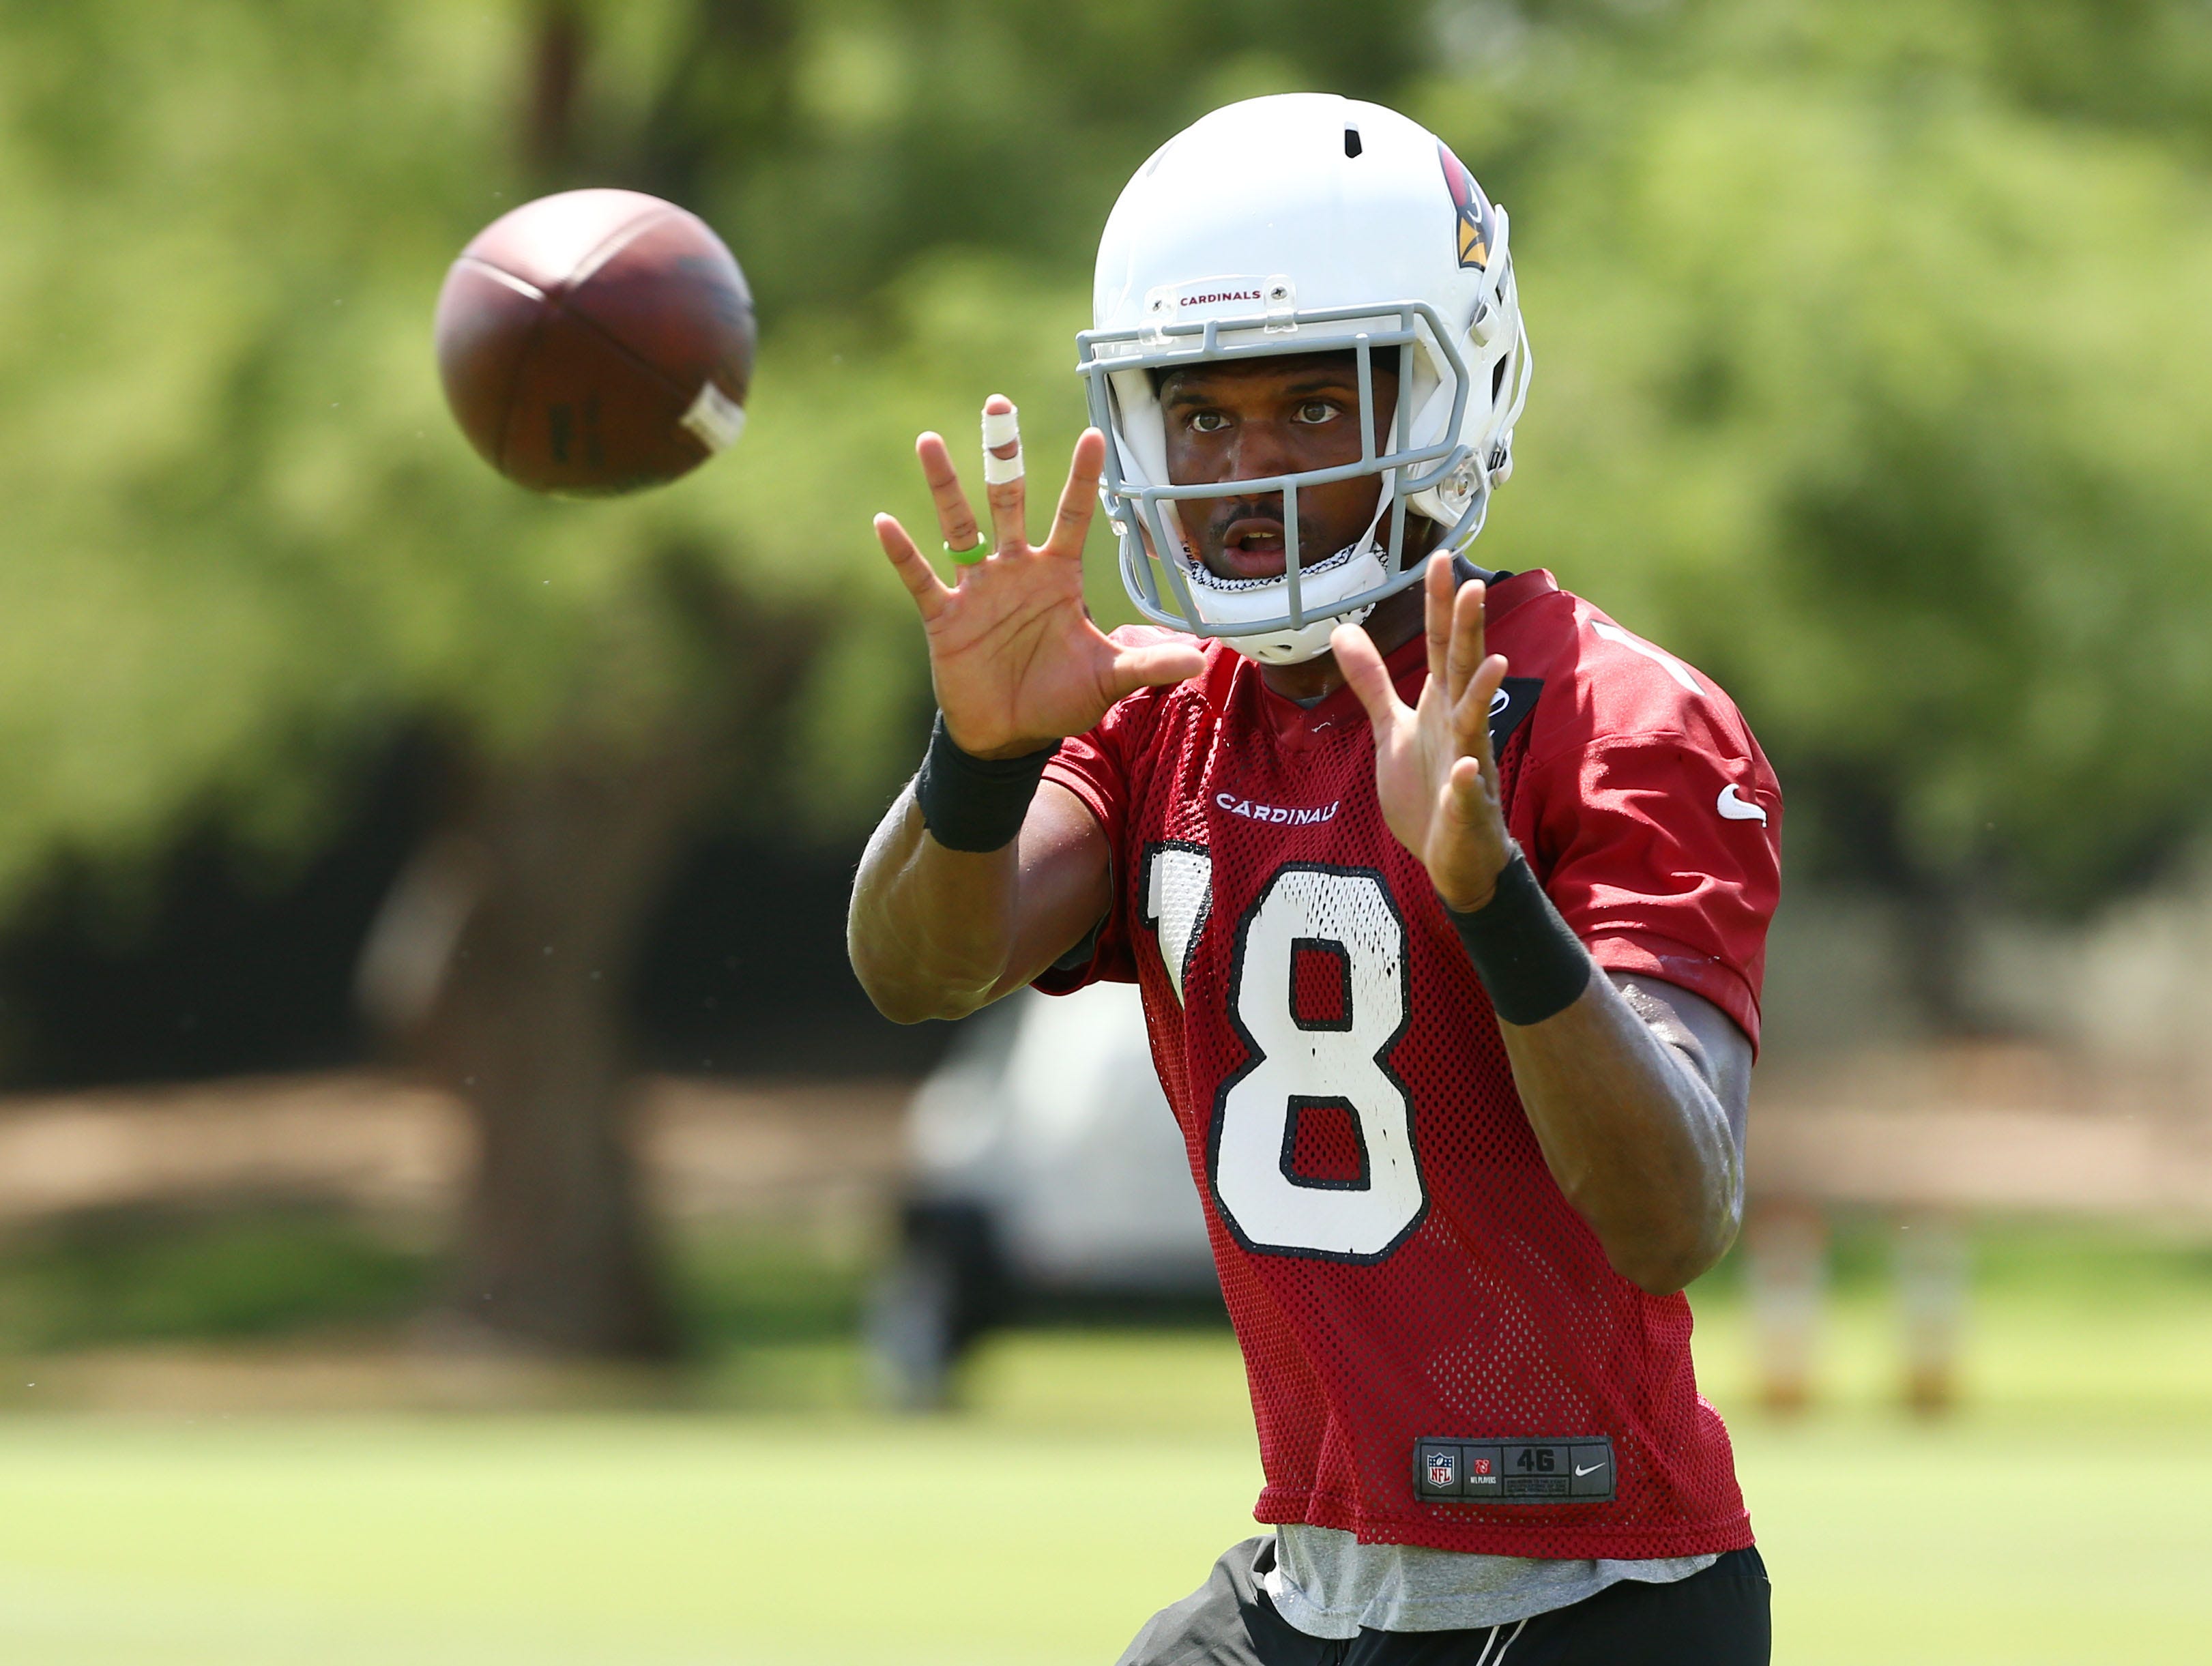 Arizona Cardinals' Brice Butler 'going to prove' he is worthy of being team's No. 2 WR